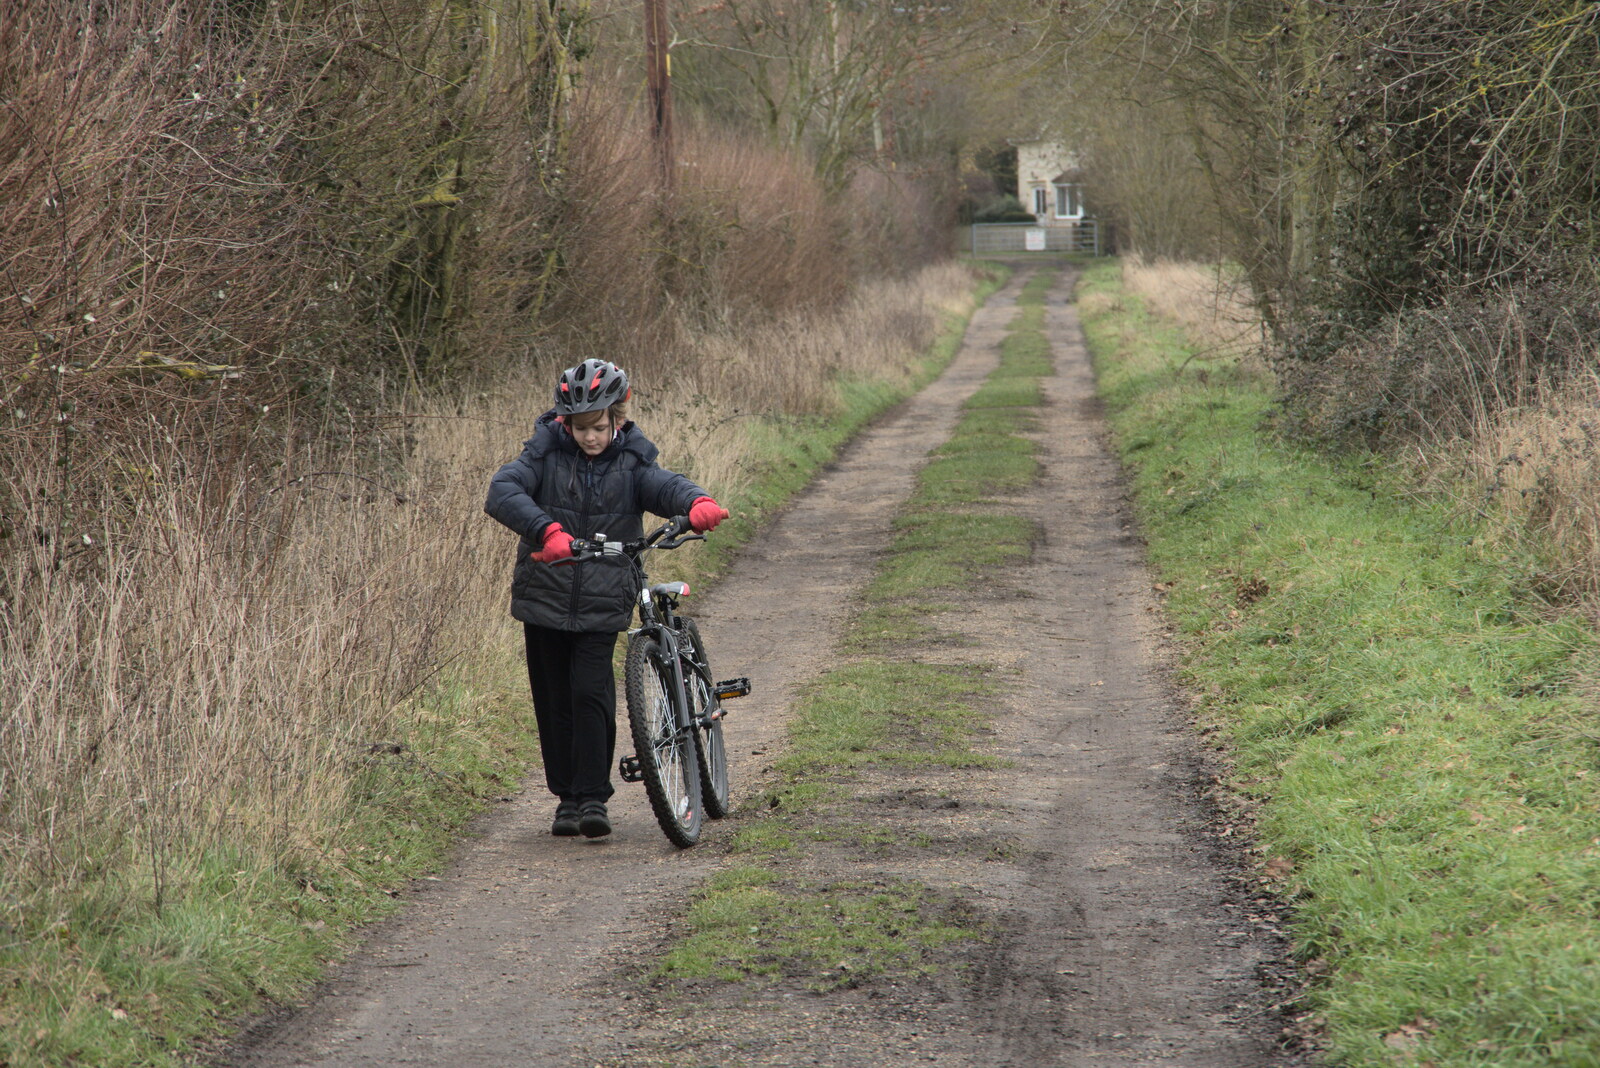 Harry pushes his bike up the hill from The Old Sewage Works, The Avenue, Brome, Suffolk - 20th February 2021